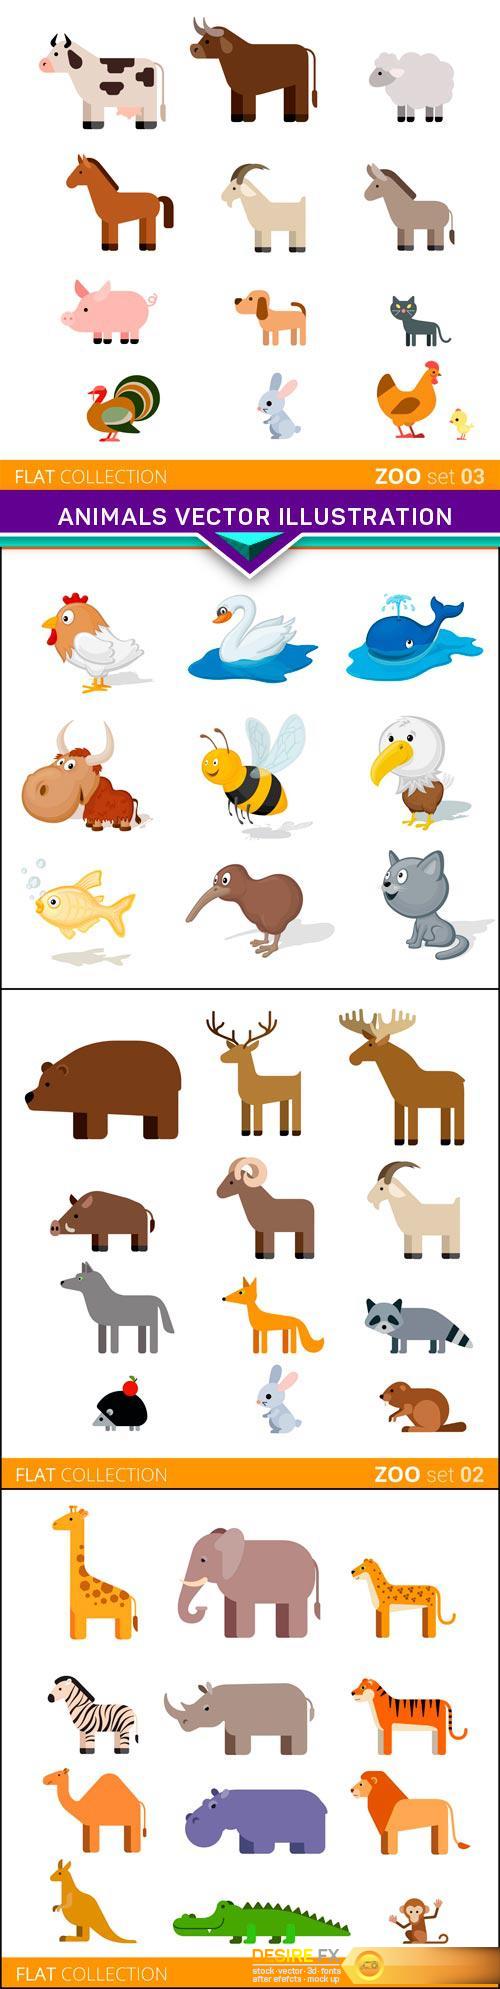 Collection of animal vector illustration 4x EPS